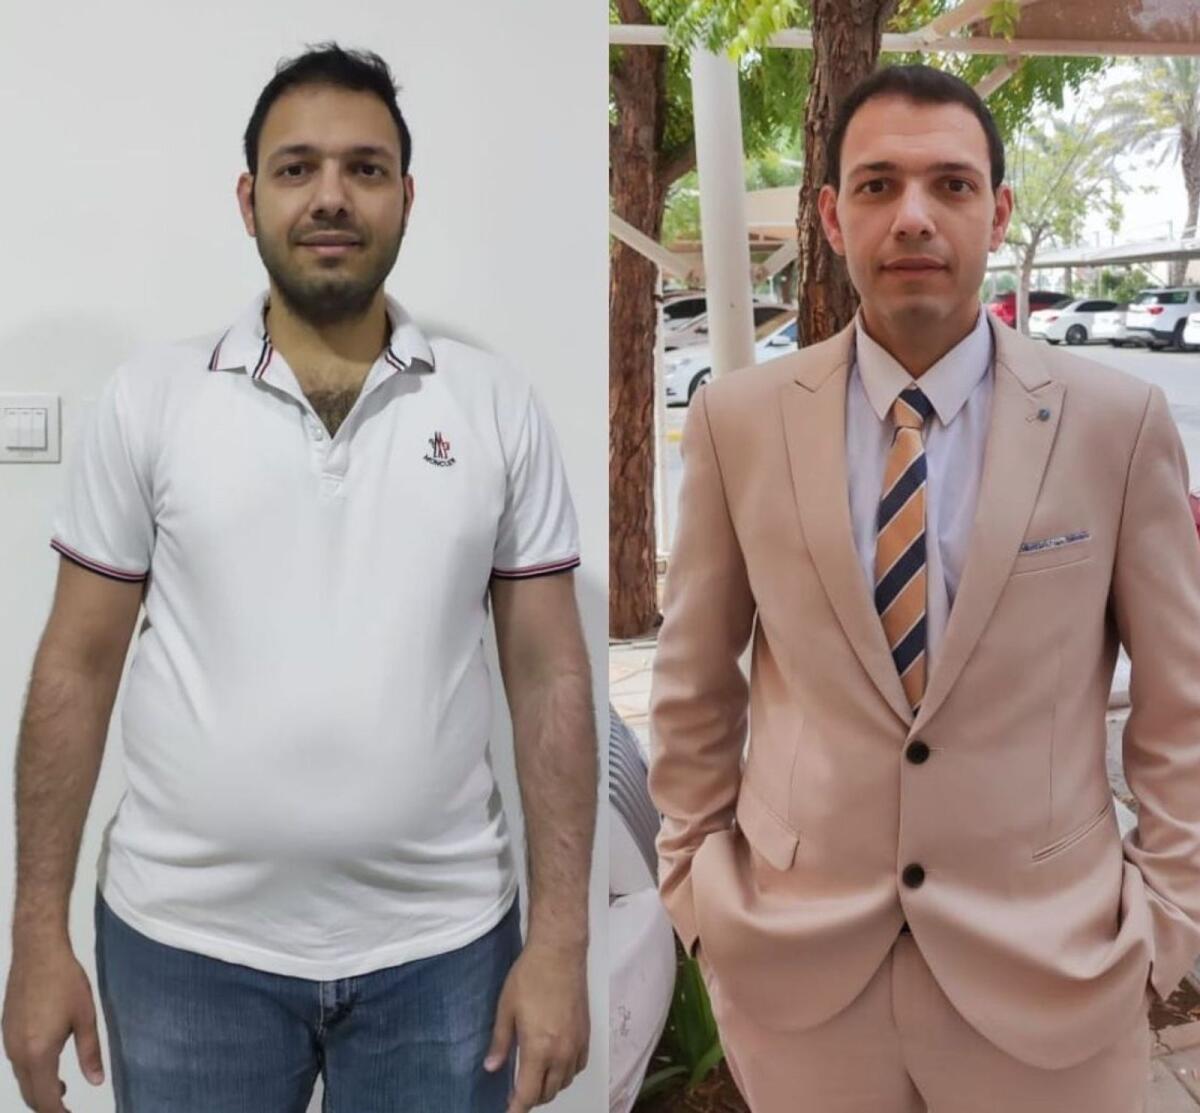 Dr Ferdaus Nalladaroo, the winner of the virtual category, lost about 27kg.